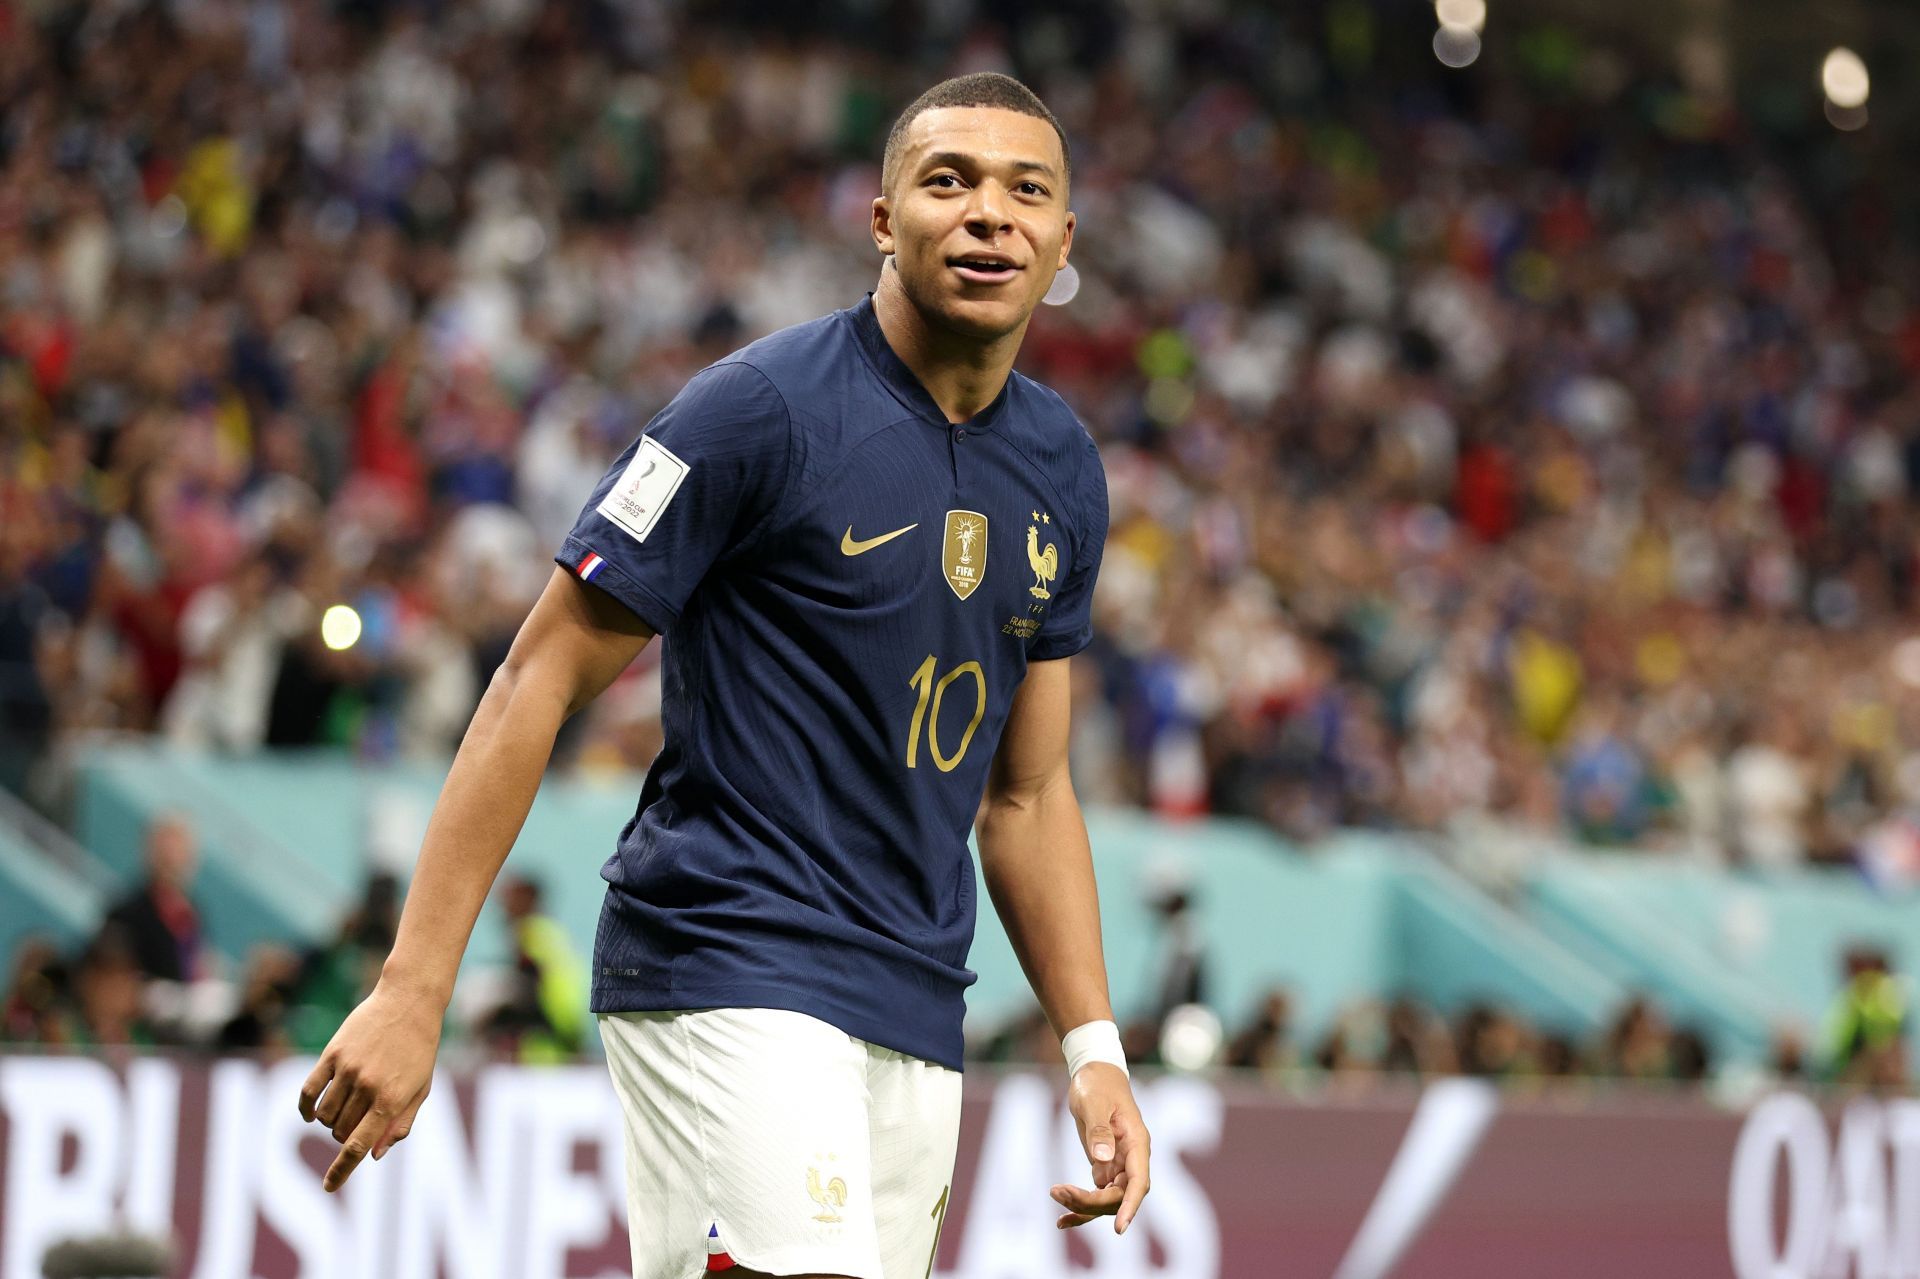 Kylian Mbappe has hit the ground running at the 2022 FIFA World Cup.